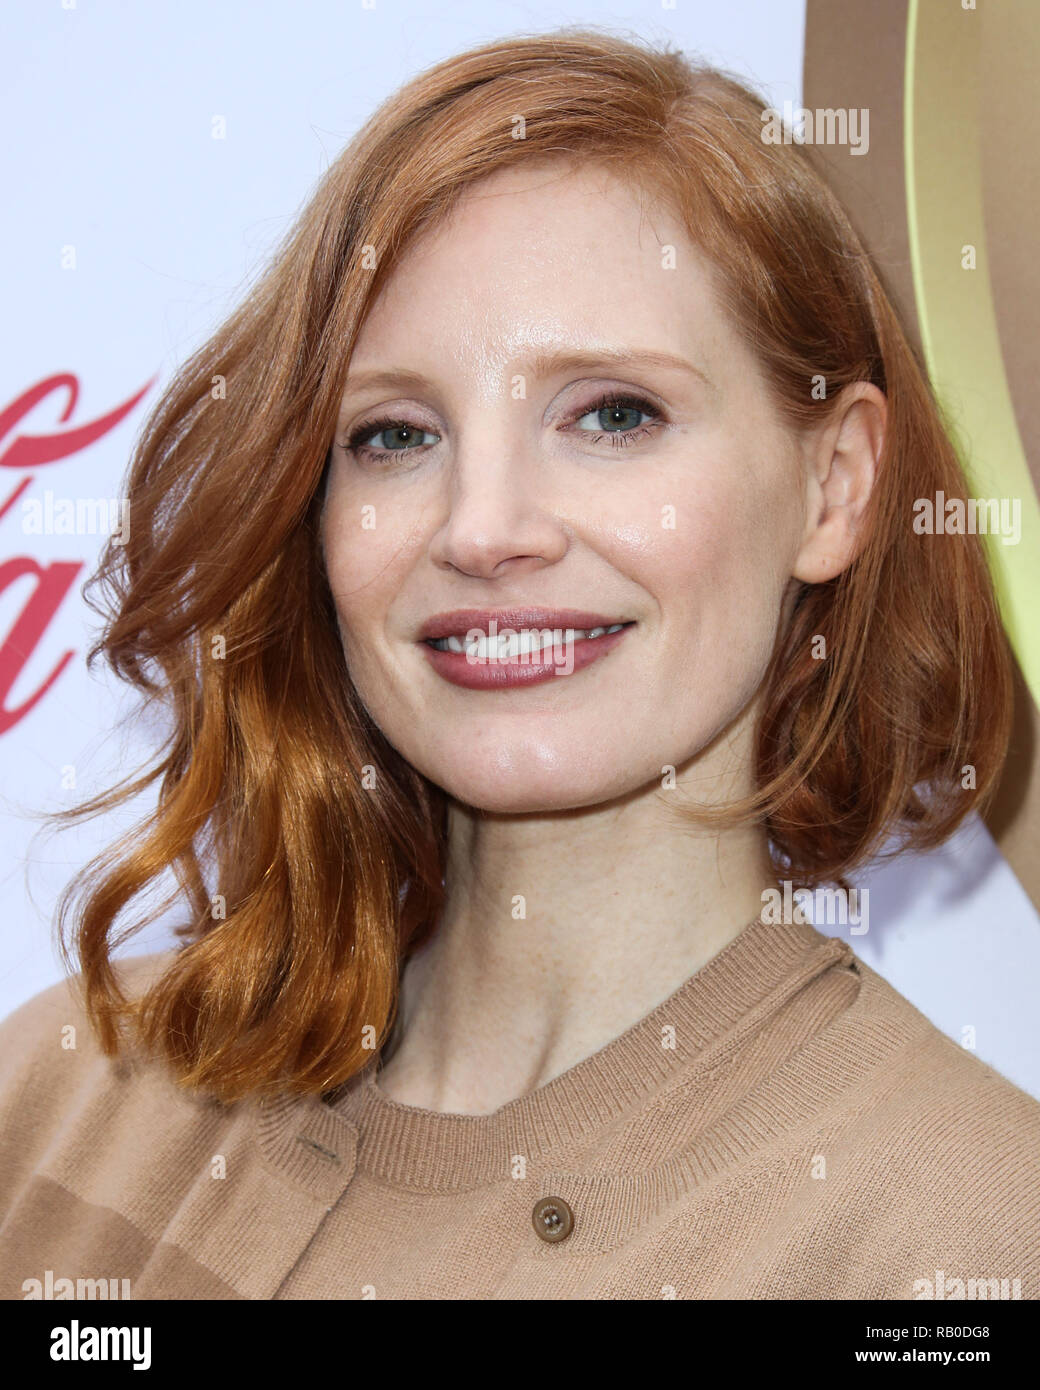 California, USA. 5th Jan 2019. Actress Jessica Chastain wearing a Burberry and Christian Louboutin shoes arrives at the 6th Annual Gold Meets Golden Event held at The House On Sunset on January 5, 2019 in West Hollywood, Los Angeles, California, United States. (Photo by Xavier Collin/Image Press Agency) Credit: Image Press Agency/Alamy Live News Stock Photo